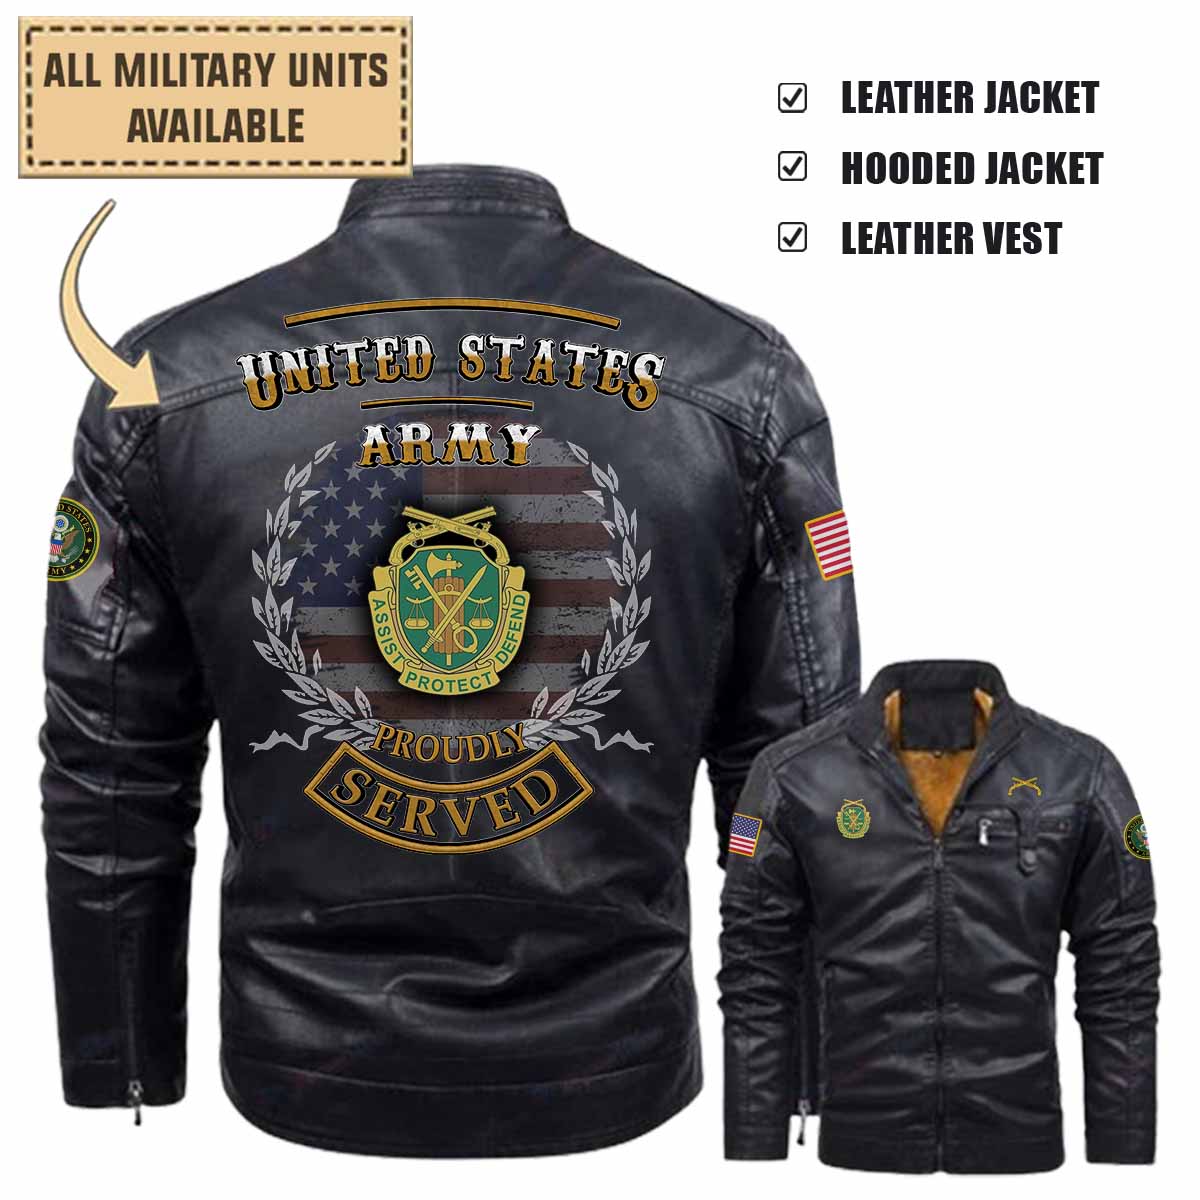 556th MP CO 556th Military Police Company_Military Leather Jacket and Vest